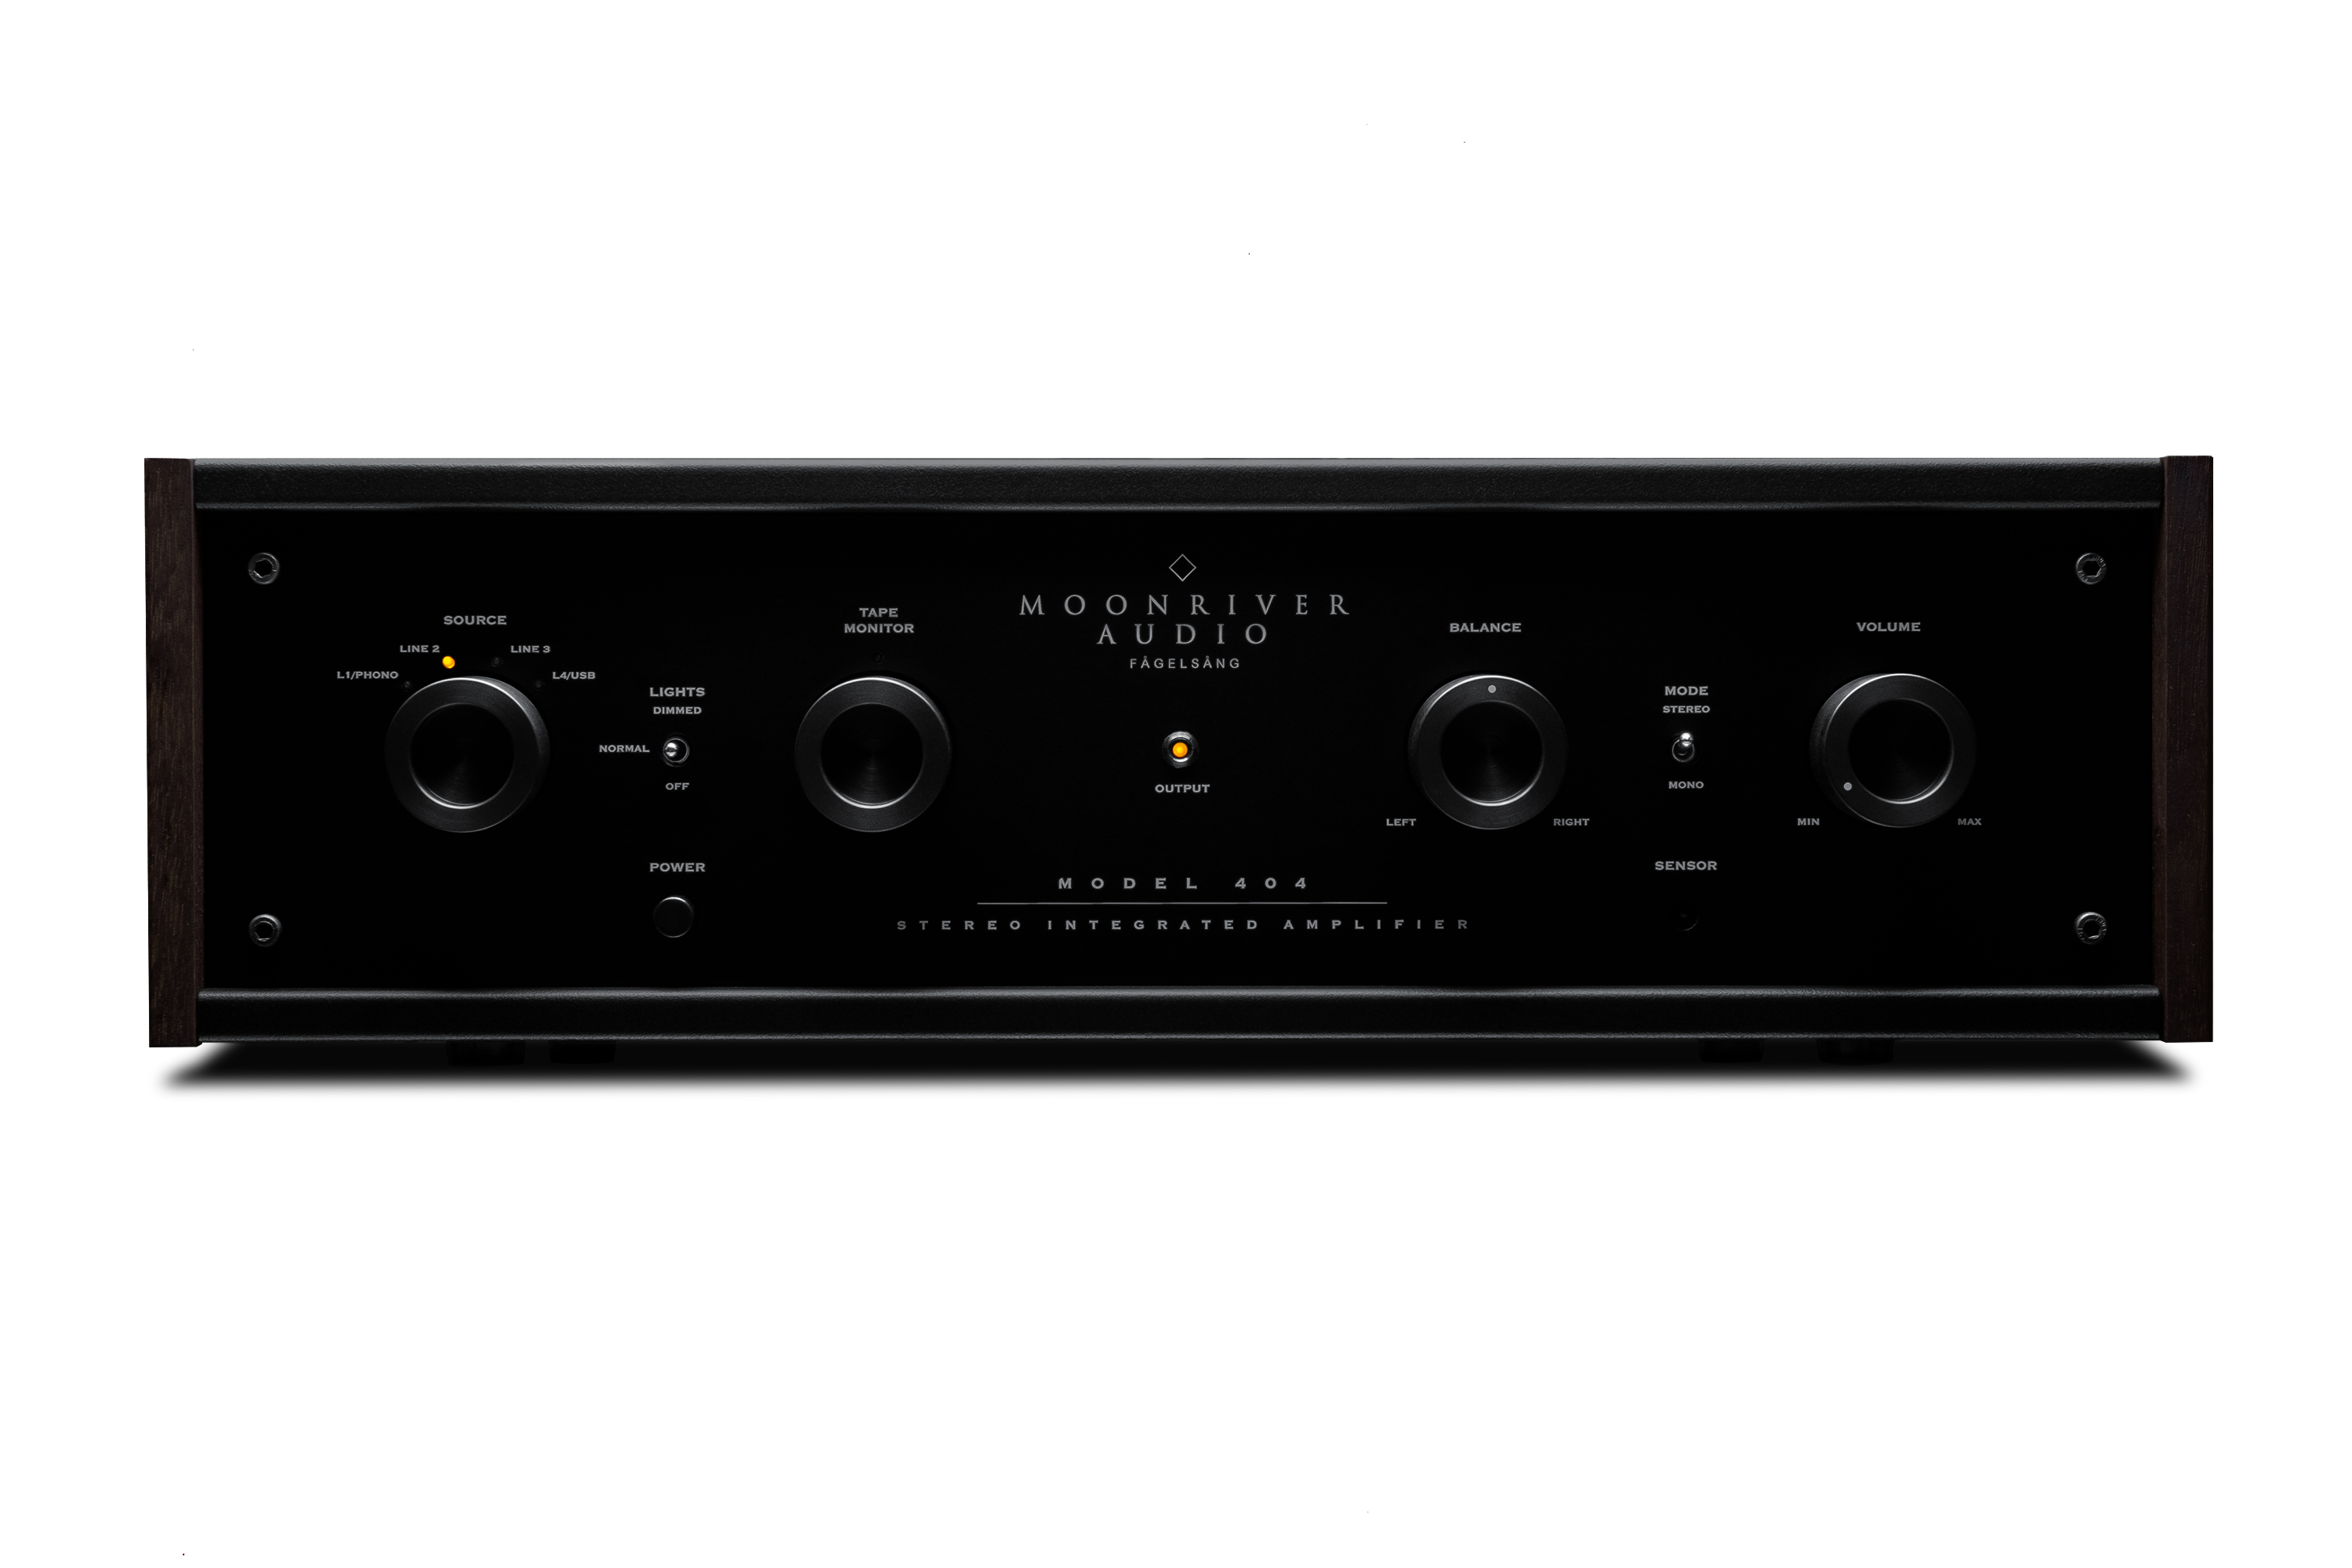 Moonriver Audio The 404 integrated amplifier